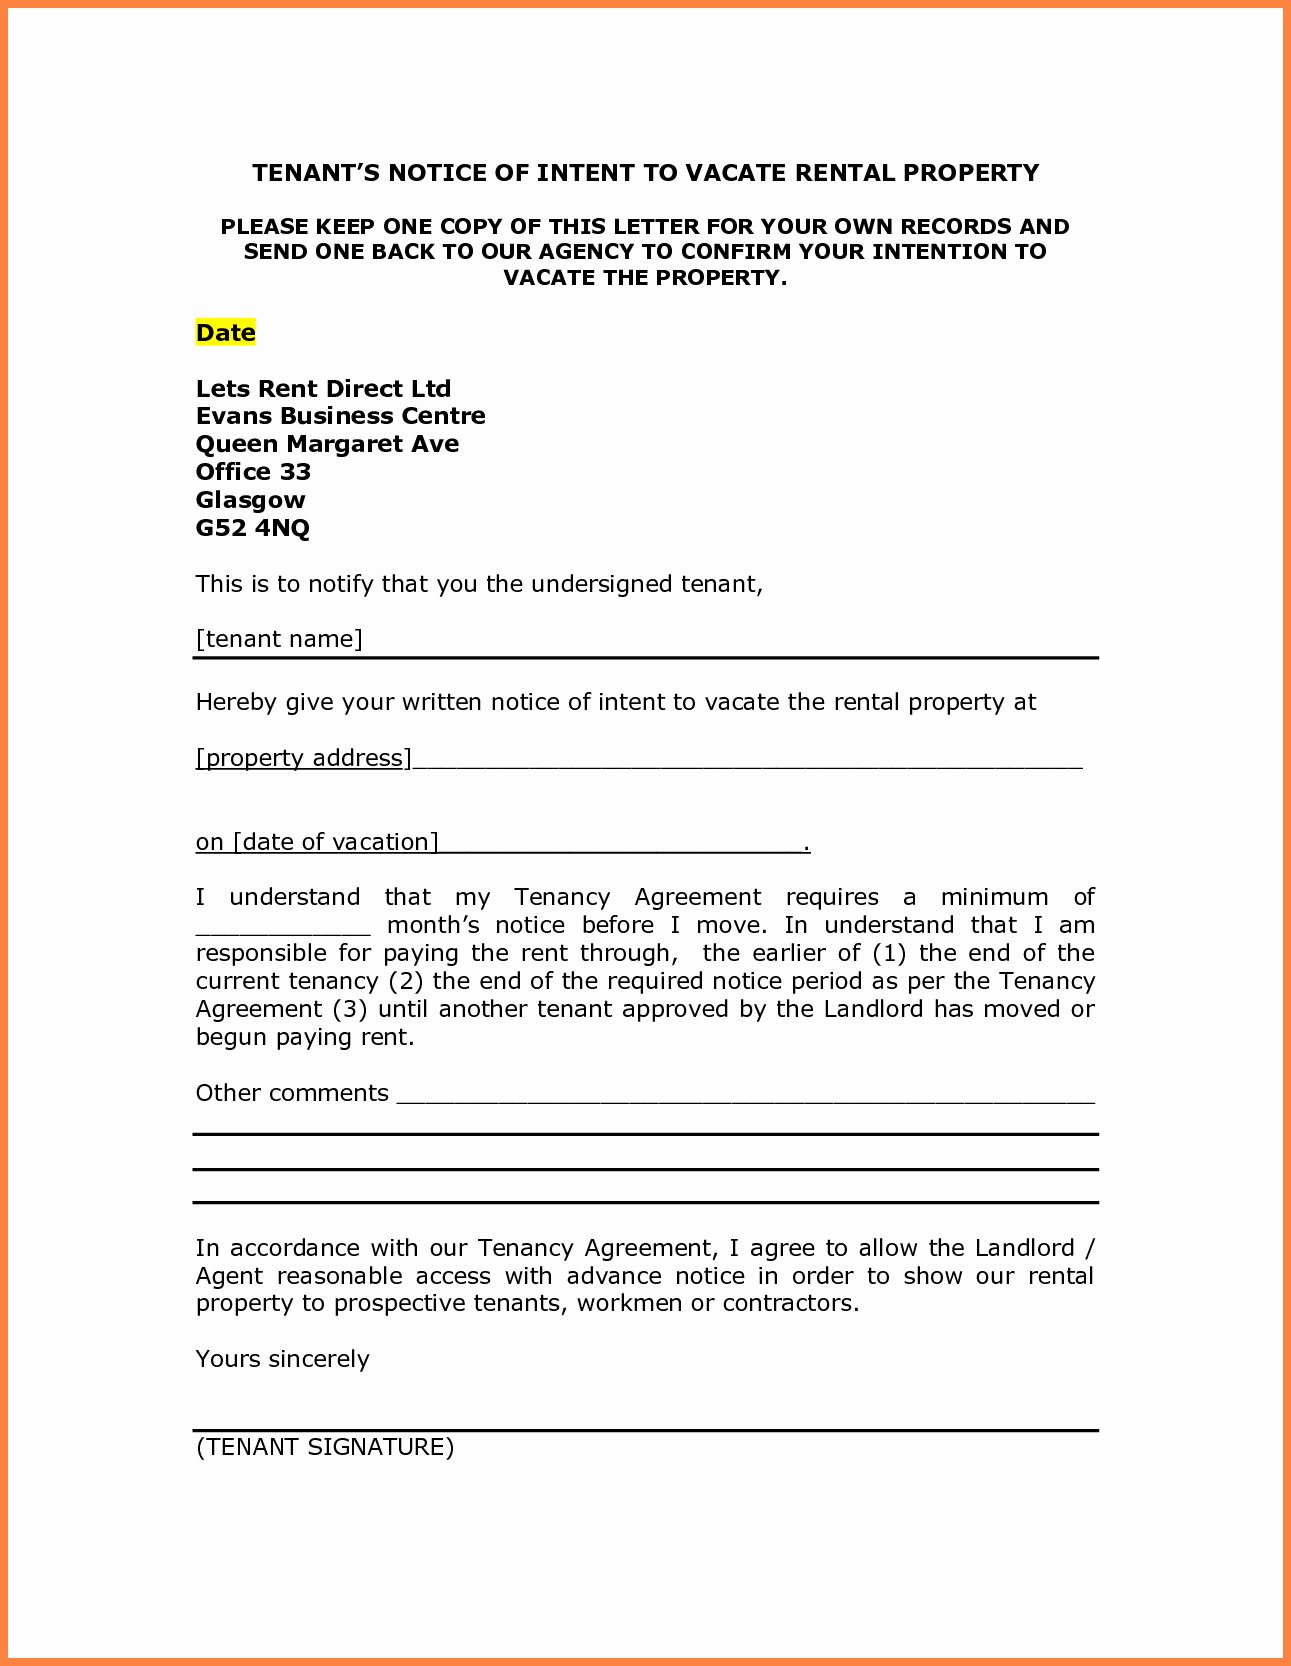 Sample Landlord Letters to Tenants Lovely Notice to Vacate Apartment Letter Template Samples